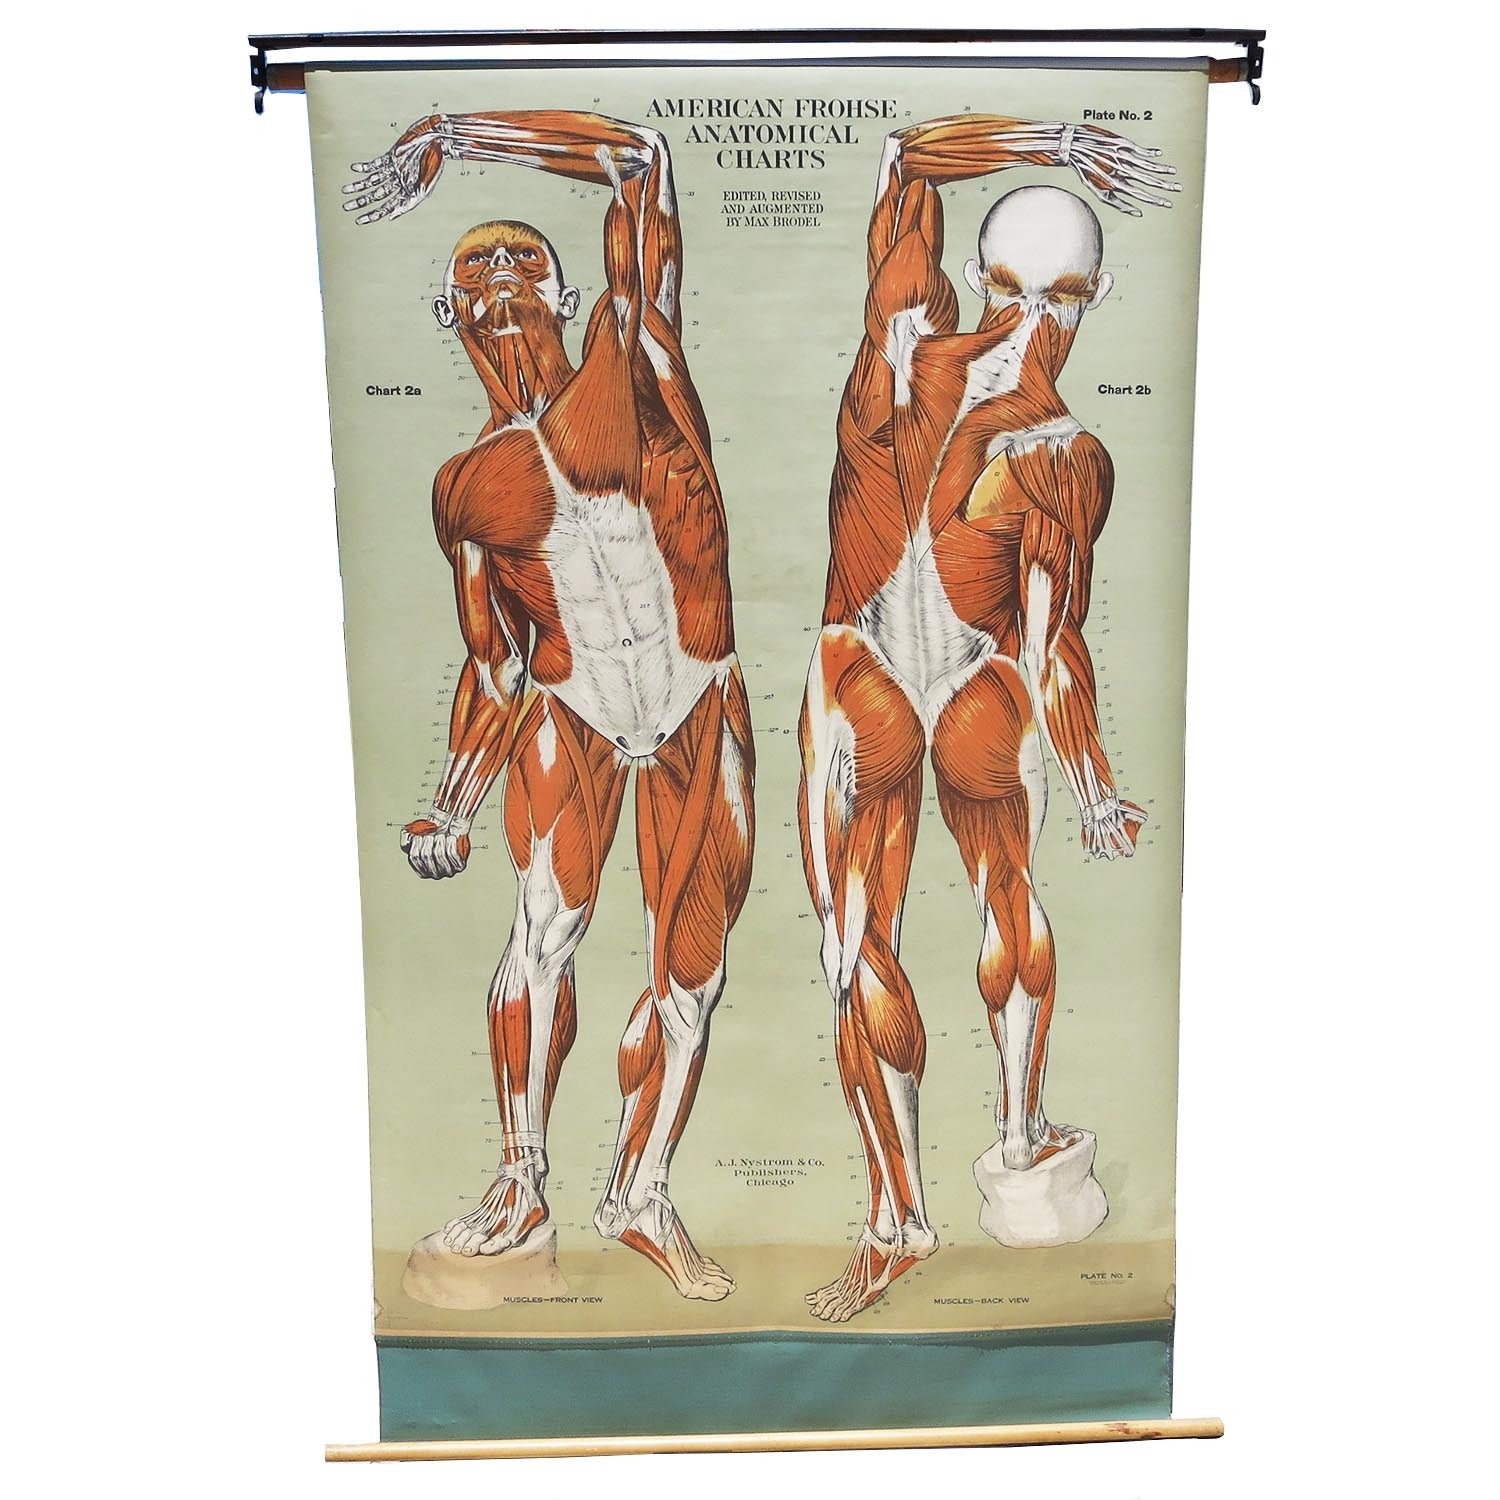 Vintage Anatomical Chart Muscular Structure of Man